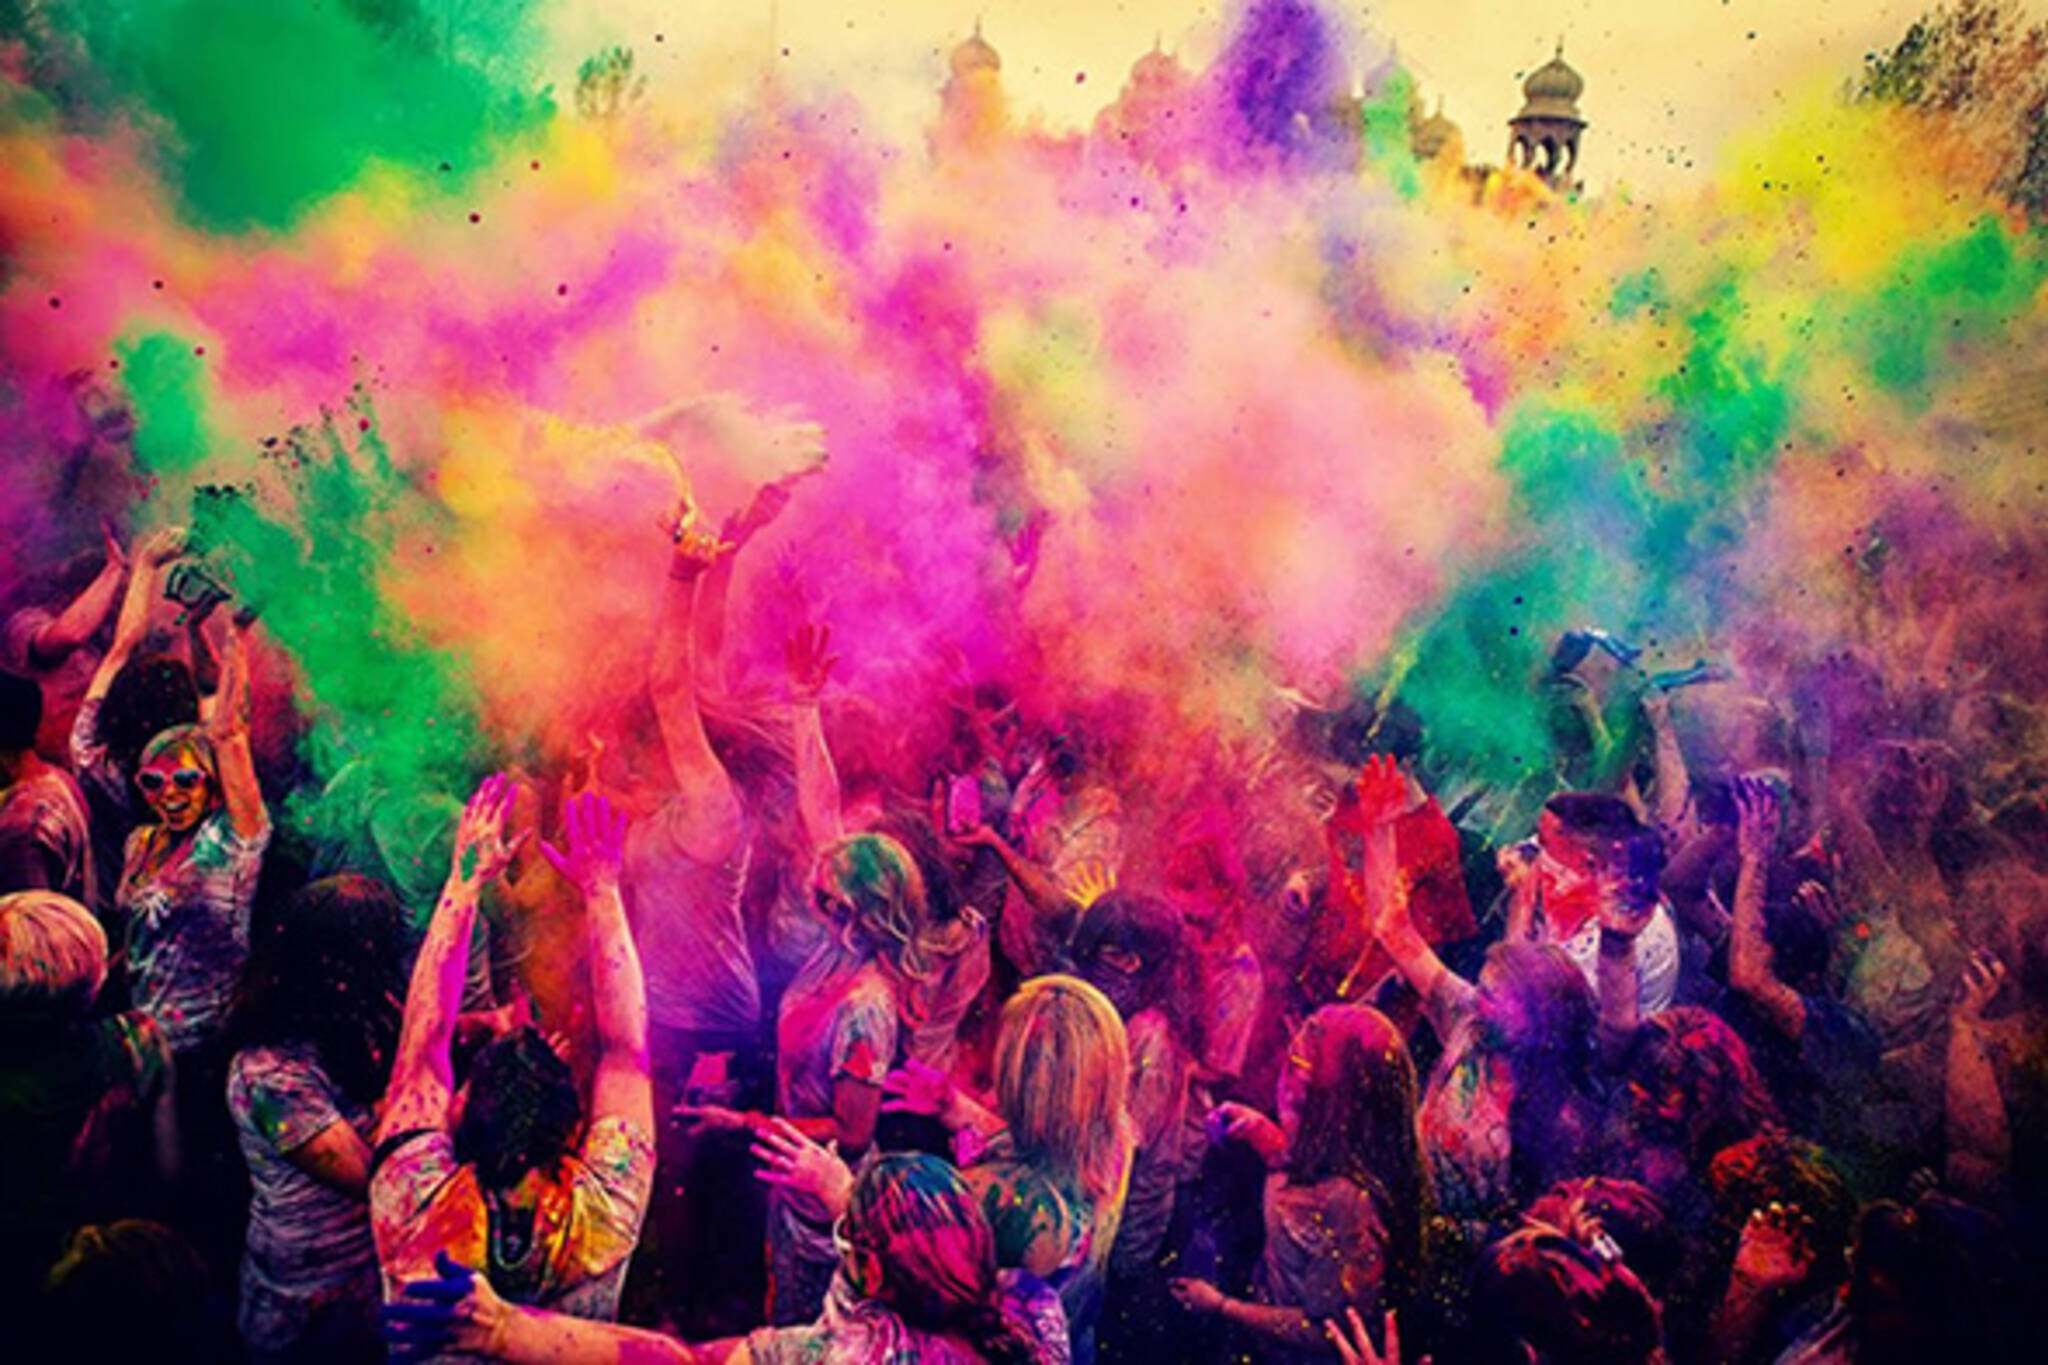 Toronto might get a Festival of Colours this summer